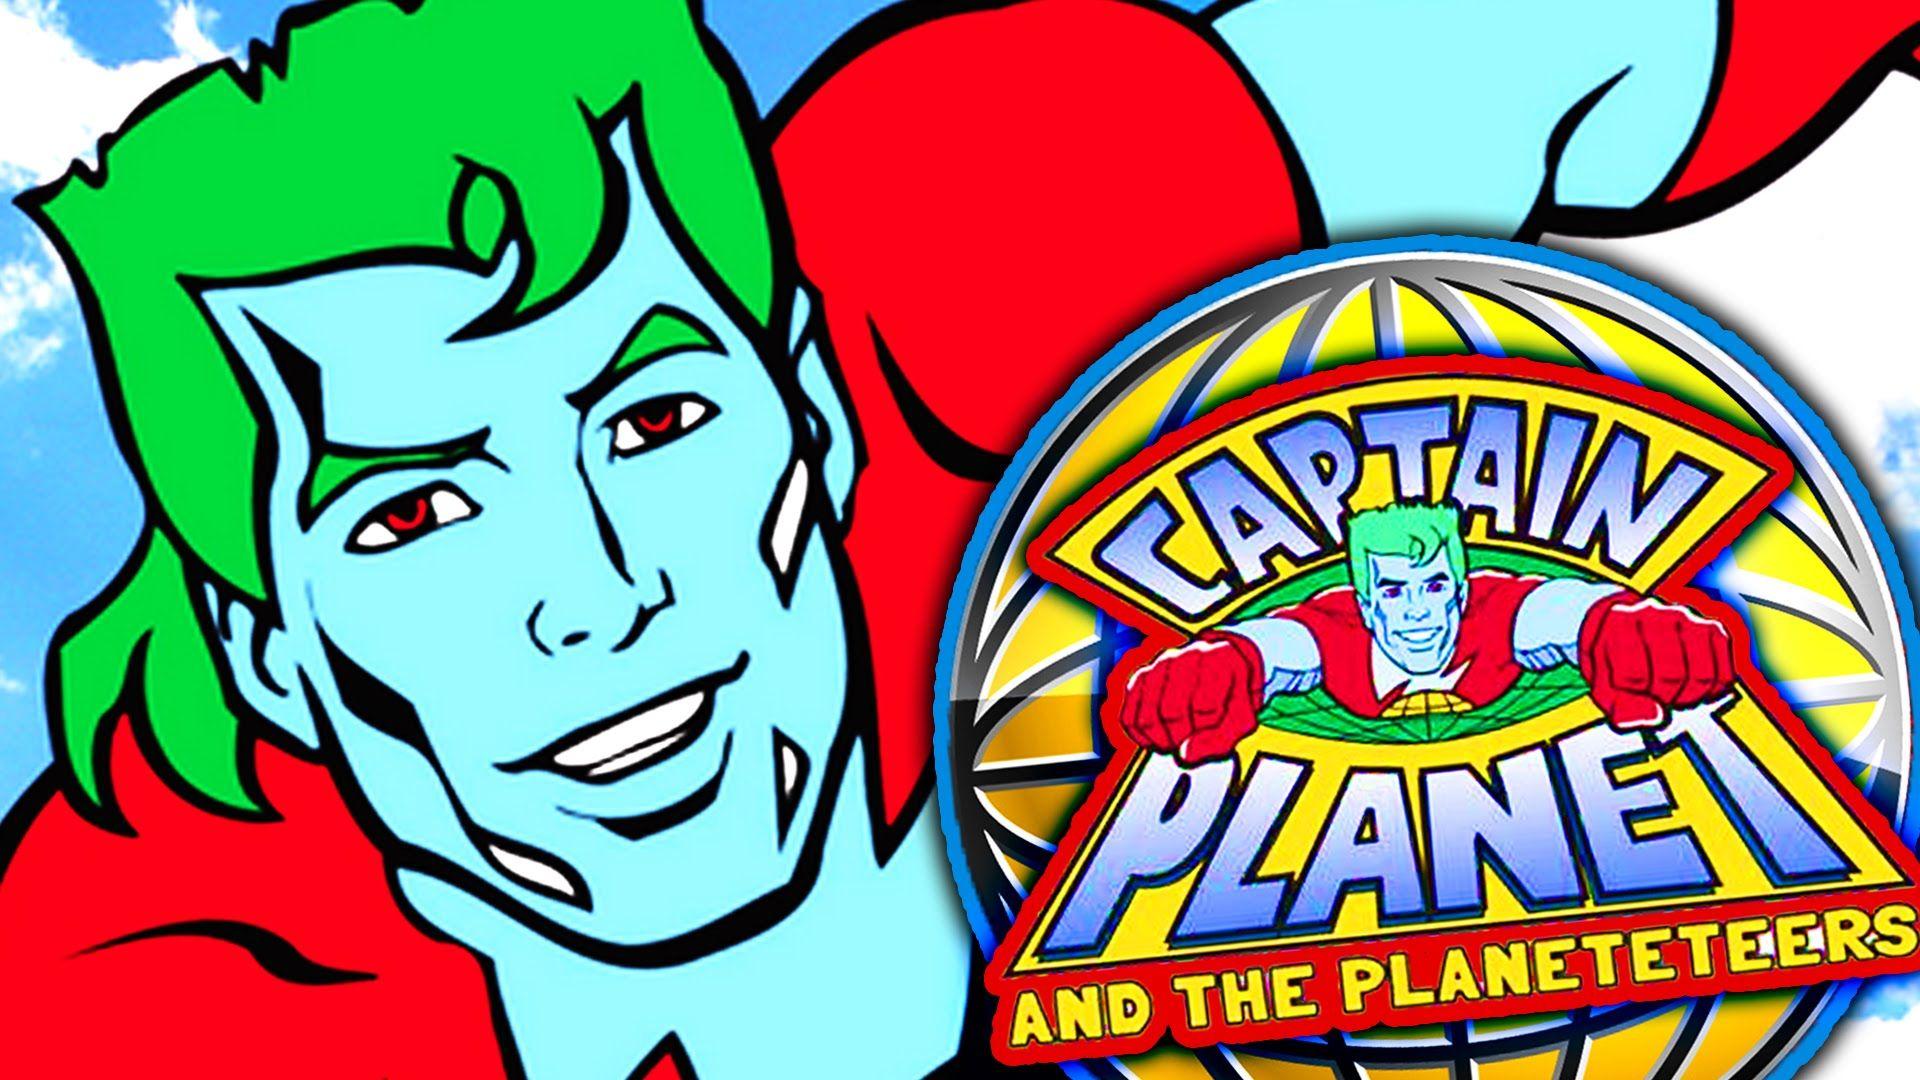 CAPTAIN PLANET To Be Made Into A Feature Film